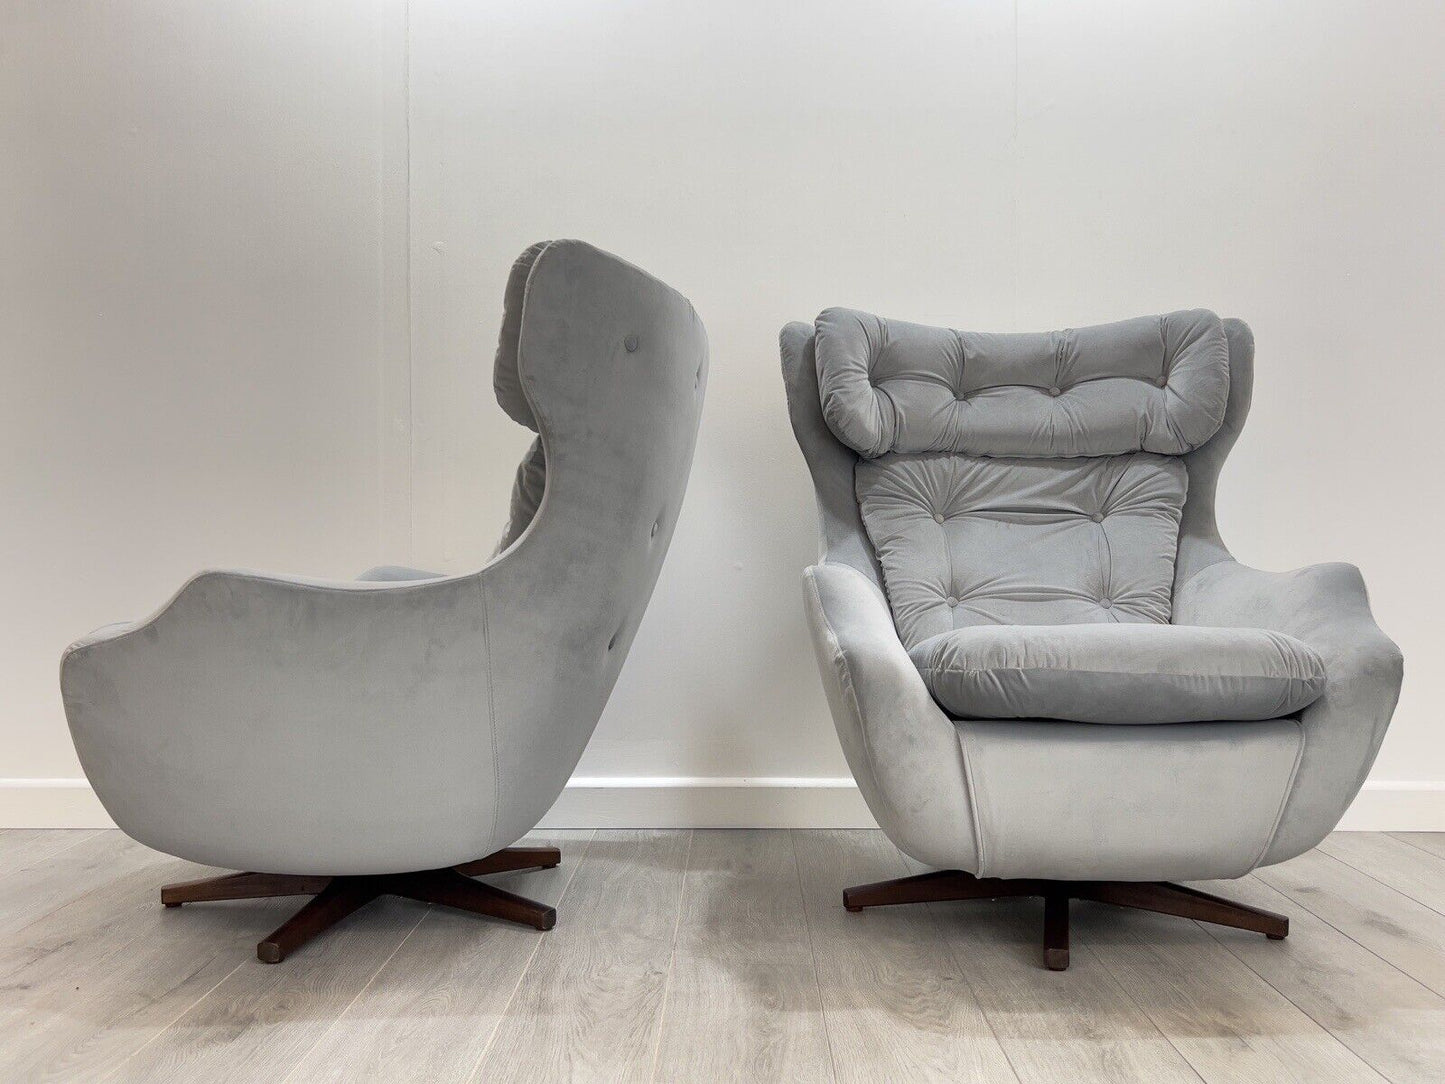 Pair of Parker Knoll Statesman, Mid Century Swivel Egg Chairs